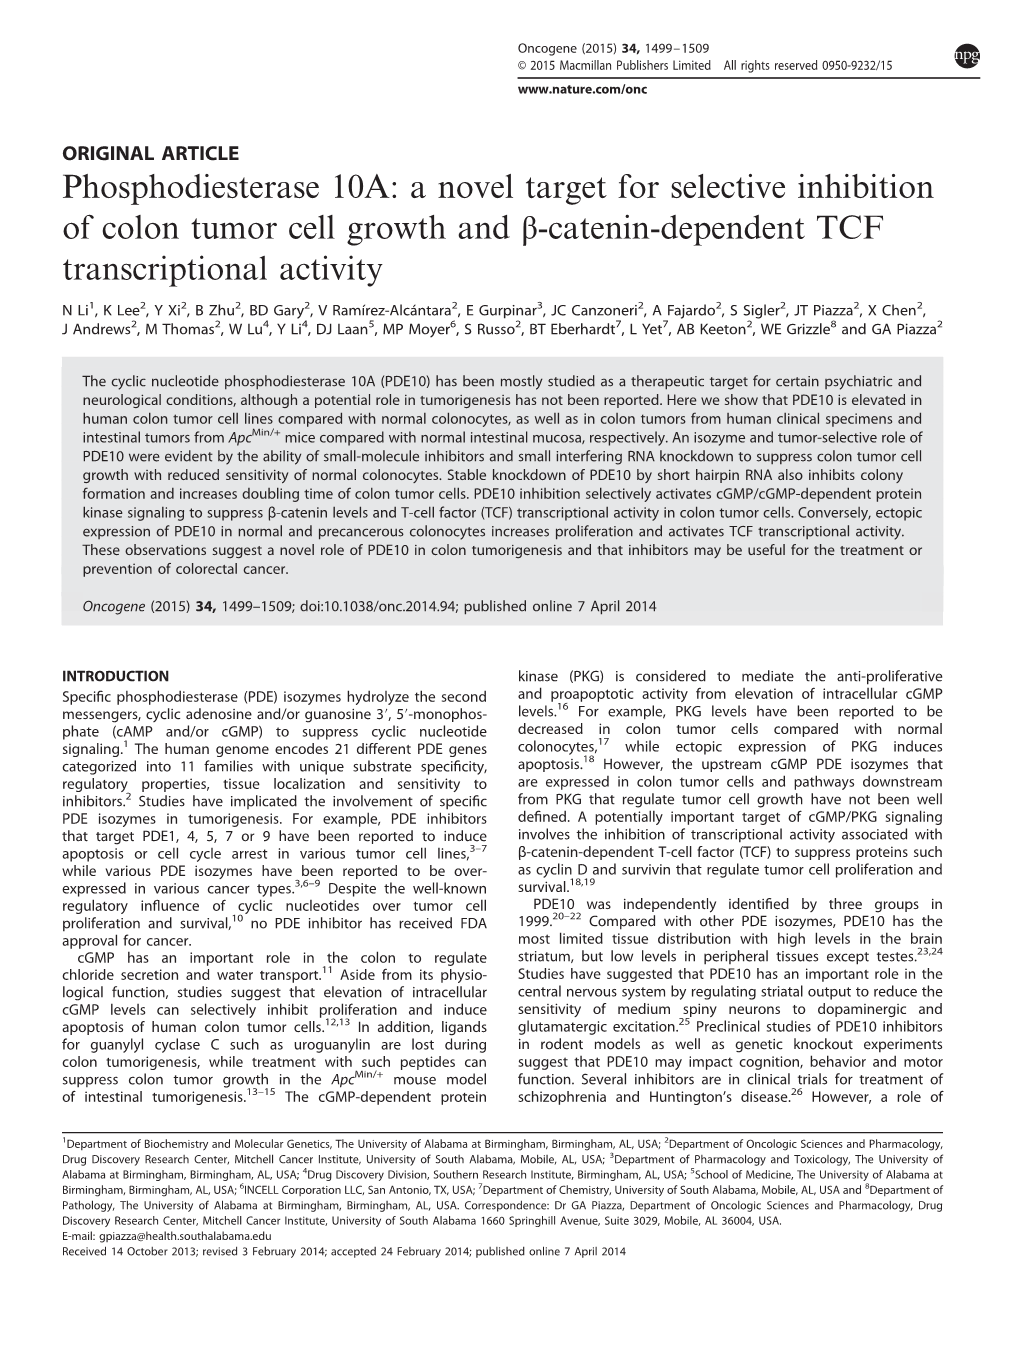 A Novel Target for Selective Inhibition of Colon Tumor Cell Growth and &Beta